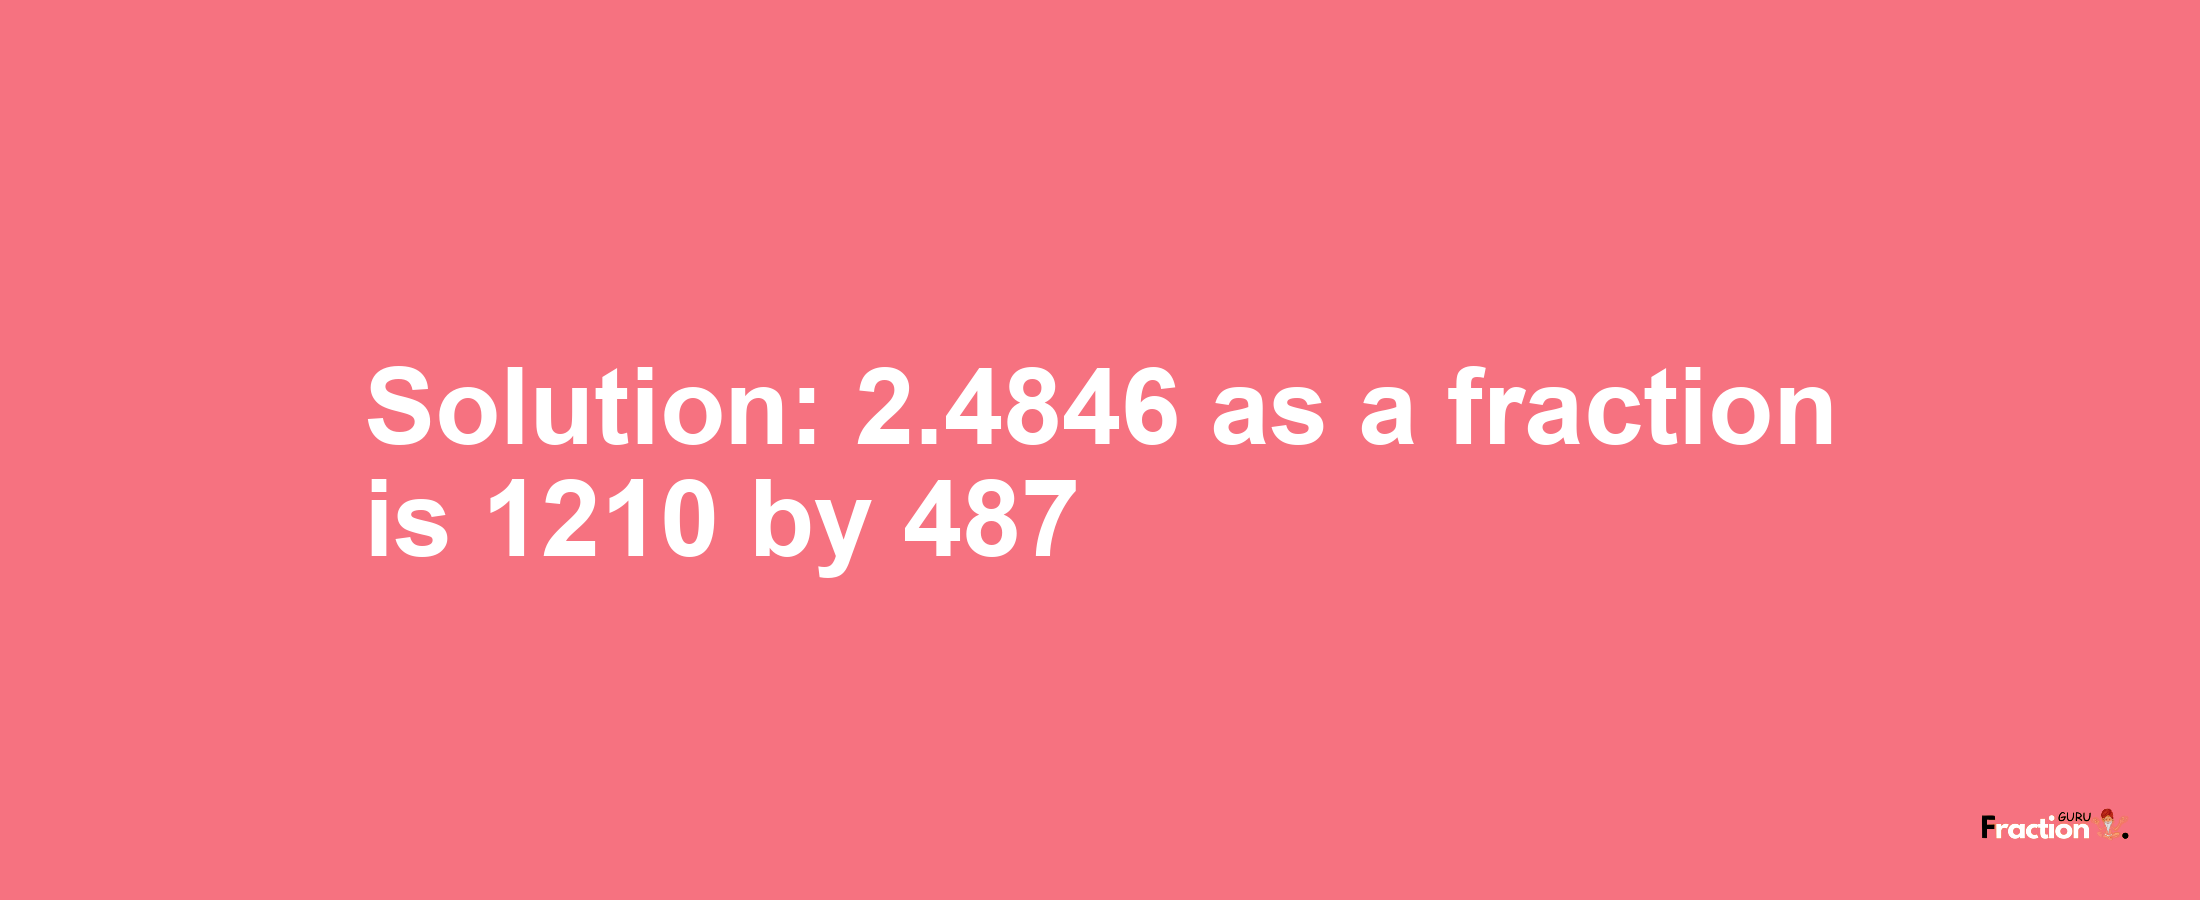 Solution:2.4846 as a fraction is 1210/487